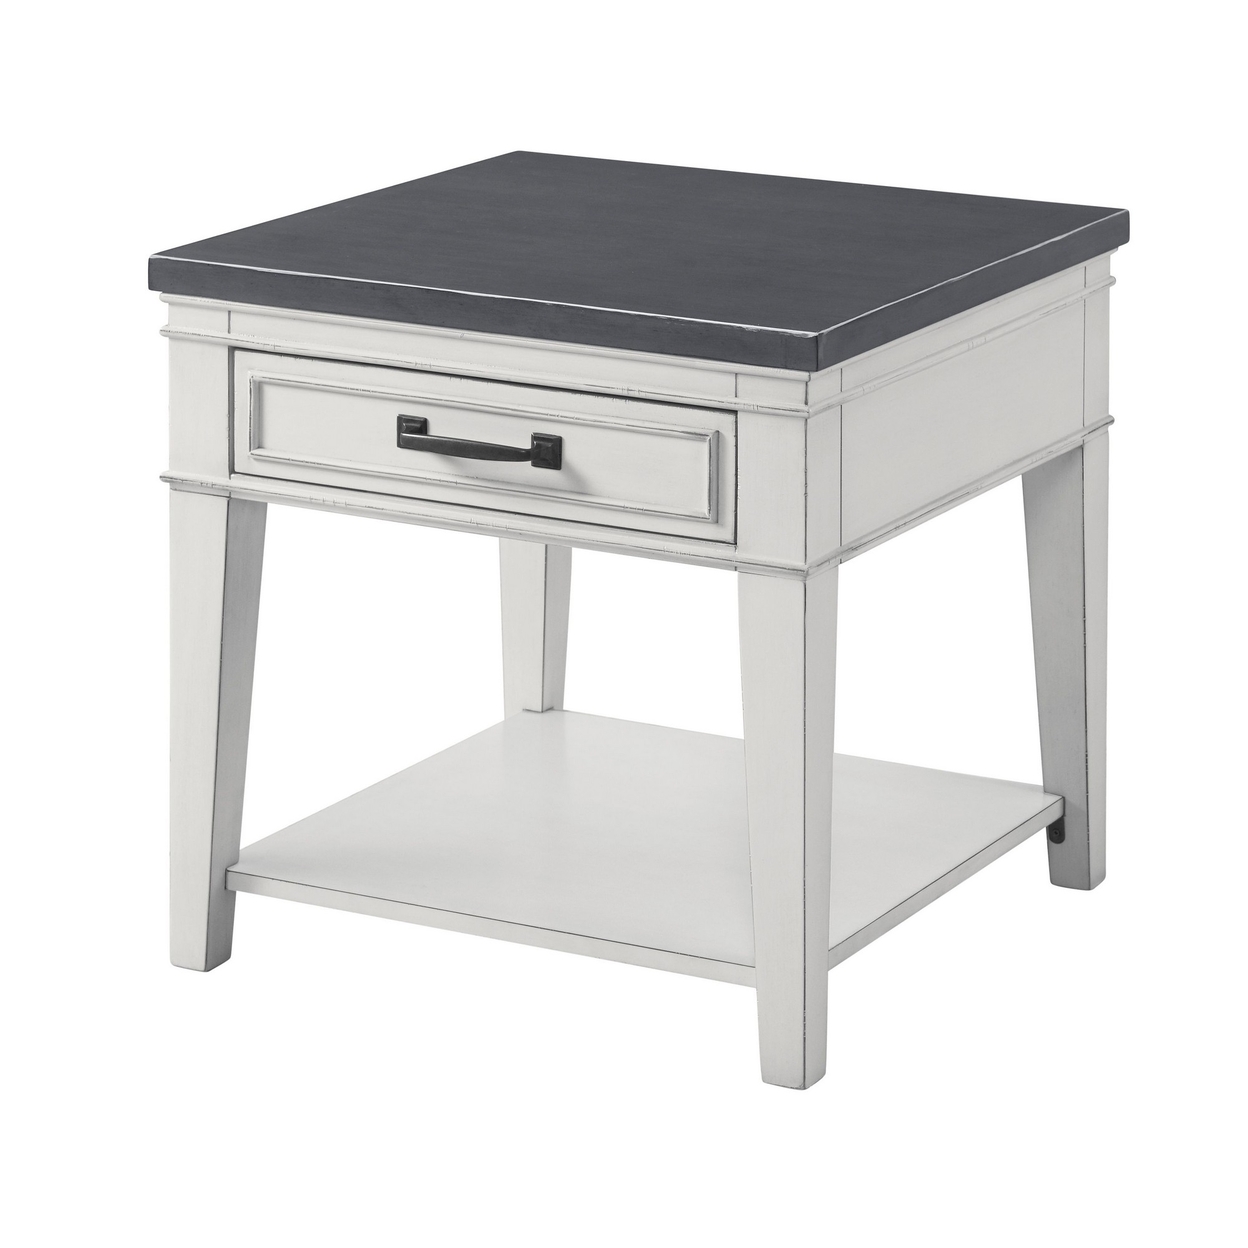 24 Inch Square End Table With 1 Drawer, White And Gray- Saltoro Sherpi